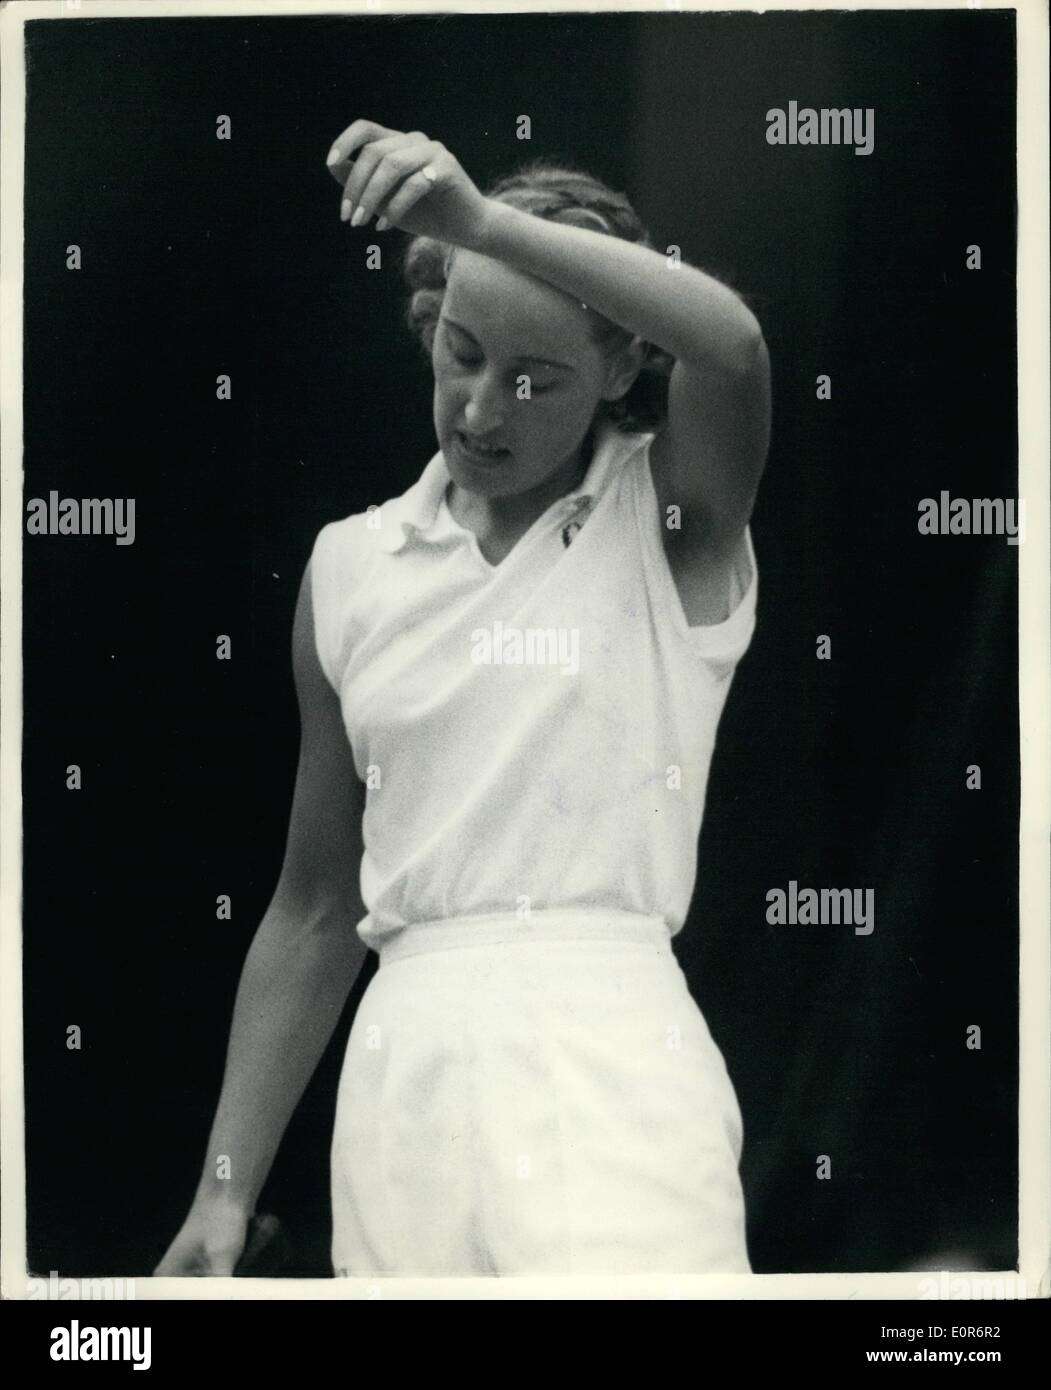 Jun. 06, 1958 - Wimbeldon Tennis Championships Miss Mortimer Wins Her Match Miss A. Mortimer (GB) wipes the presperation off ehr forehead-during her match with Miss E. Buding (Stateless-originally from Germany)- in the ladies' singles at Wimbledon this afternoon.. Miss Mortimer won 6-2;6-4. Stock Photo